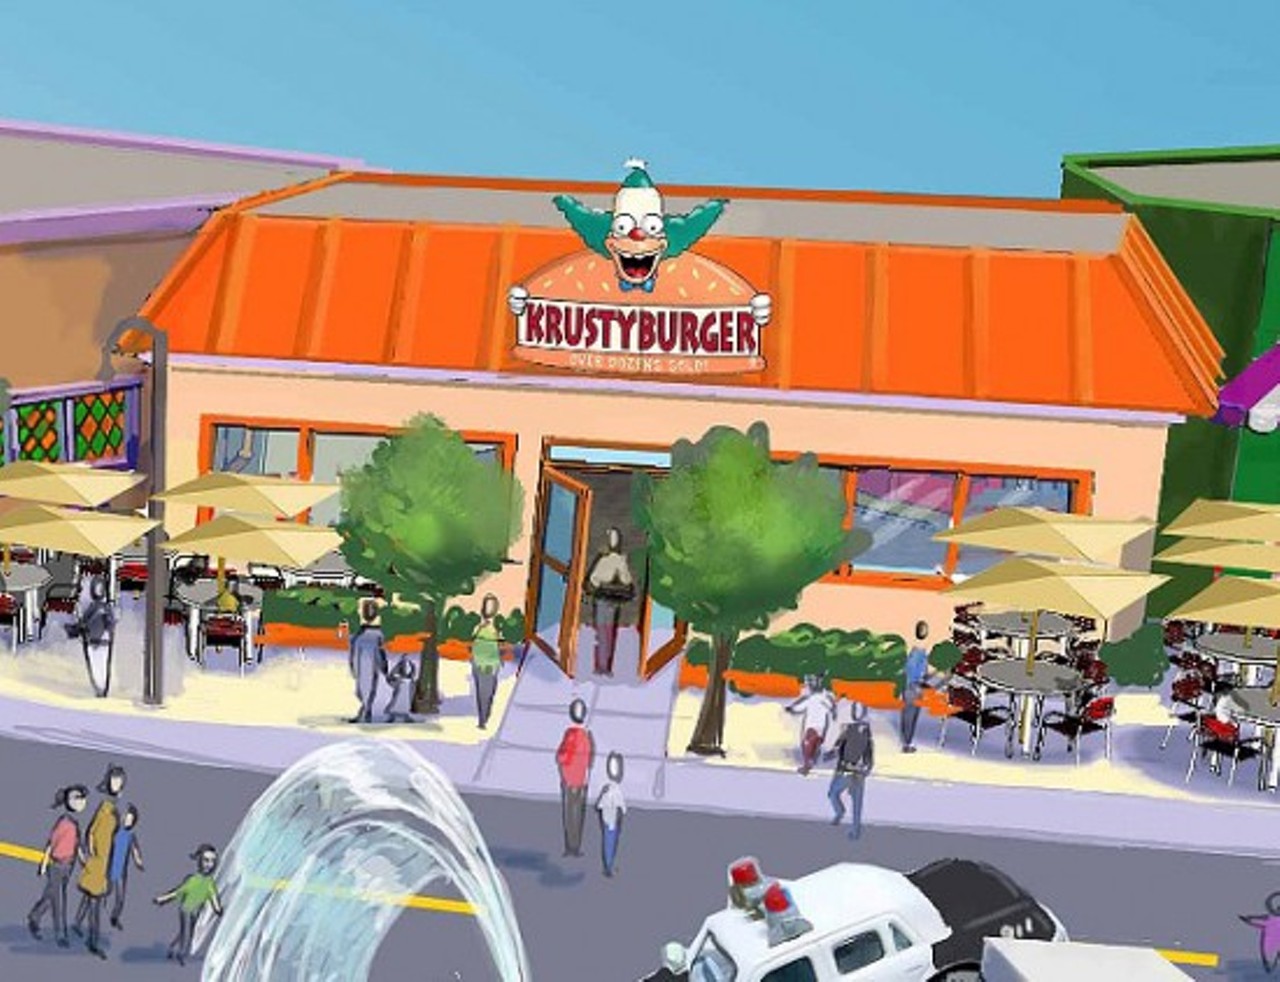 And no Springfield would be complete without a Krusty Burger. This is the Universal sketch of the one they'll have ...